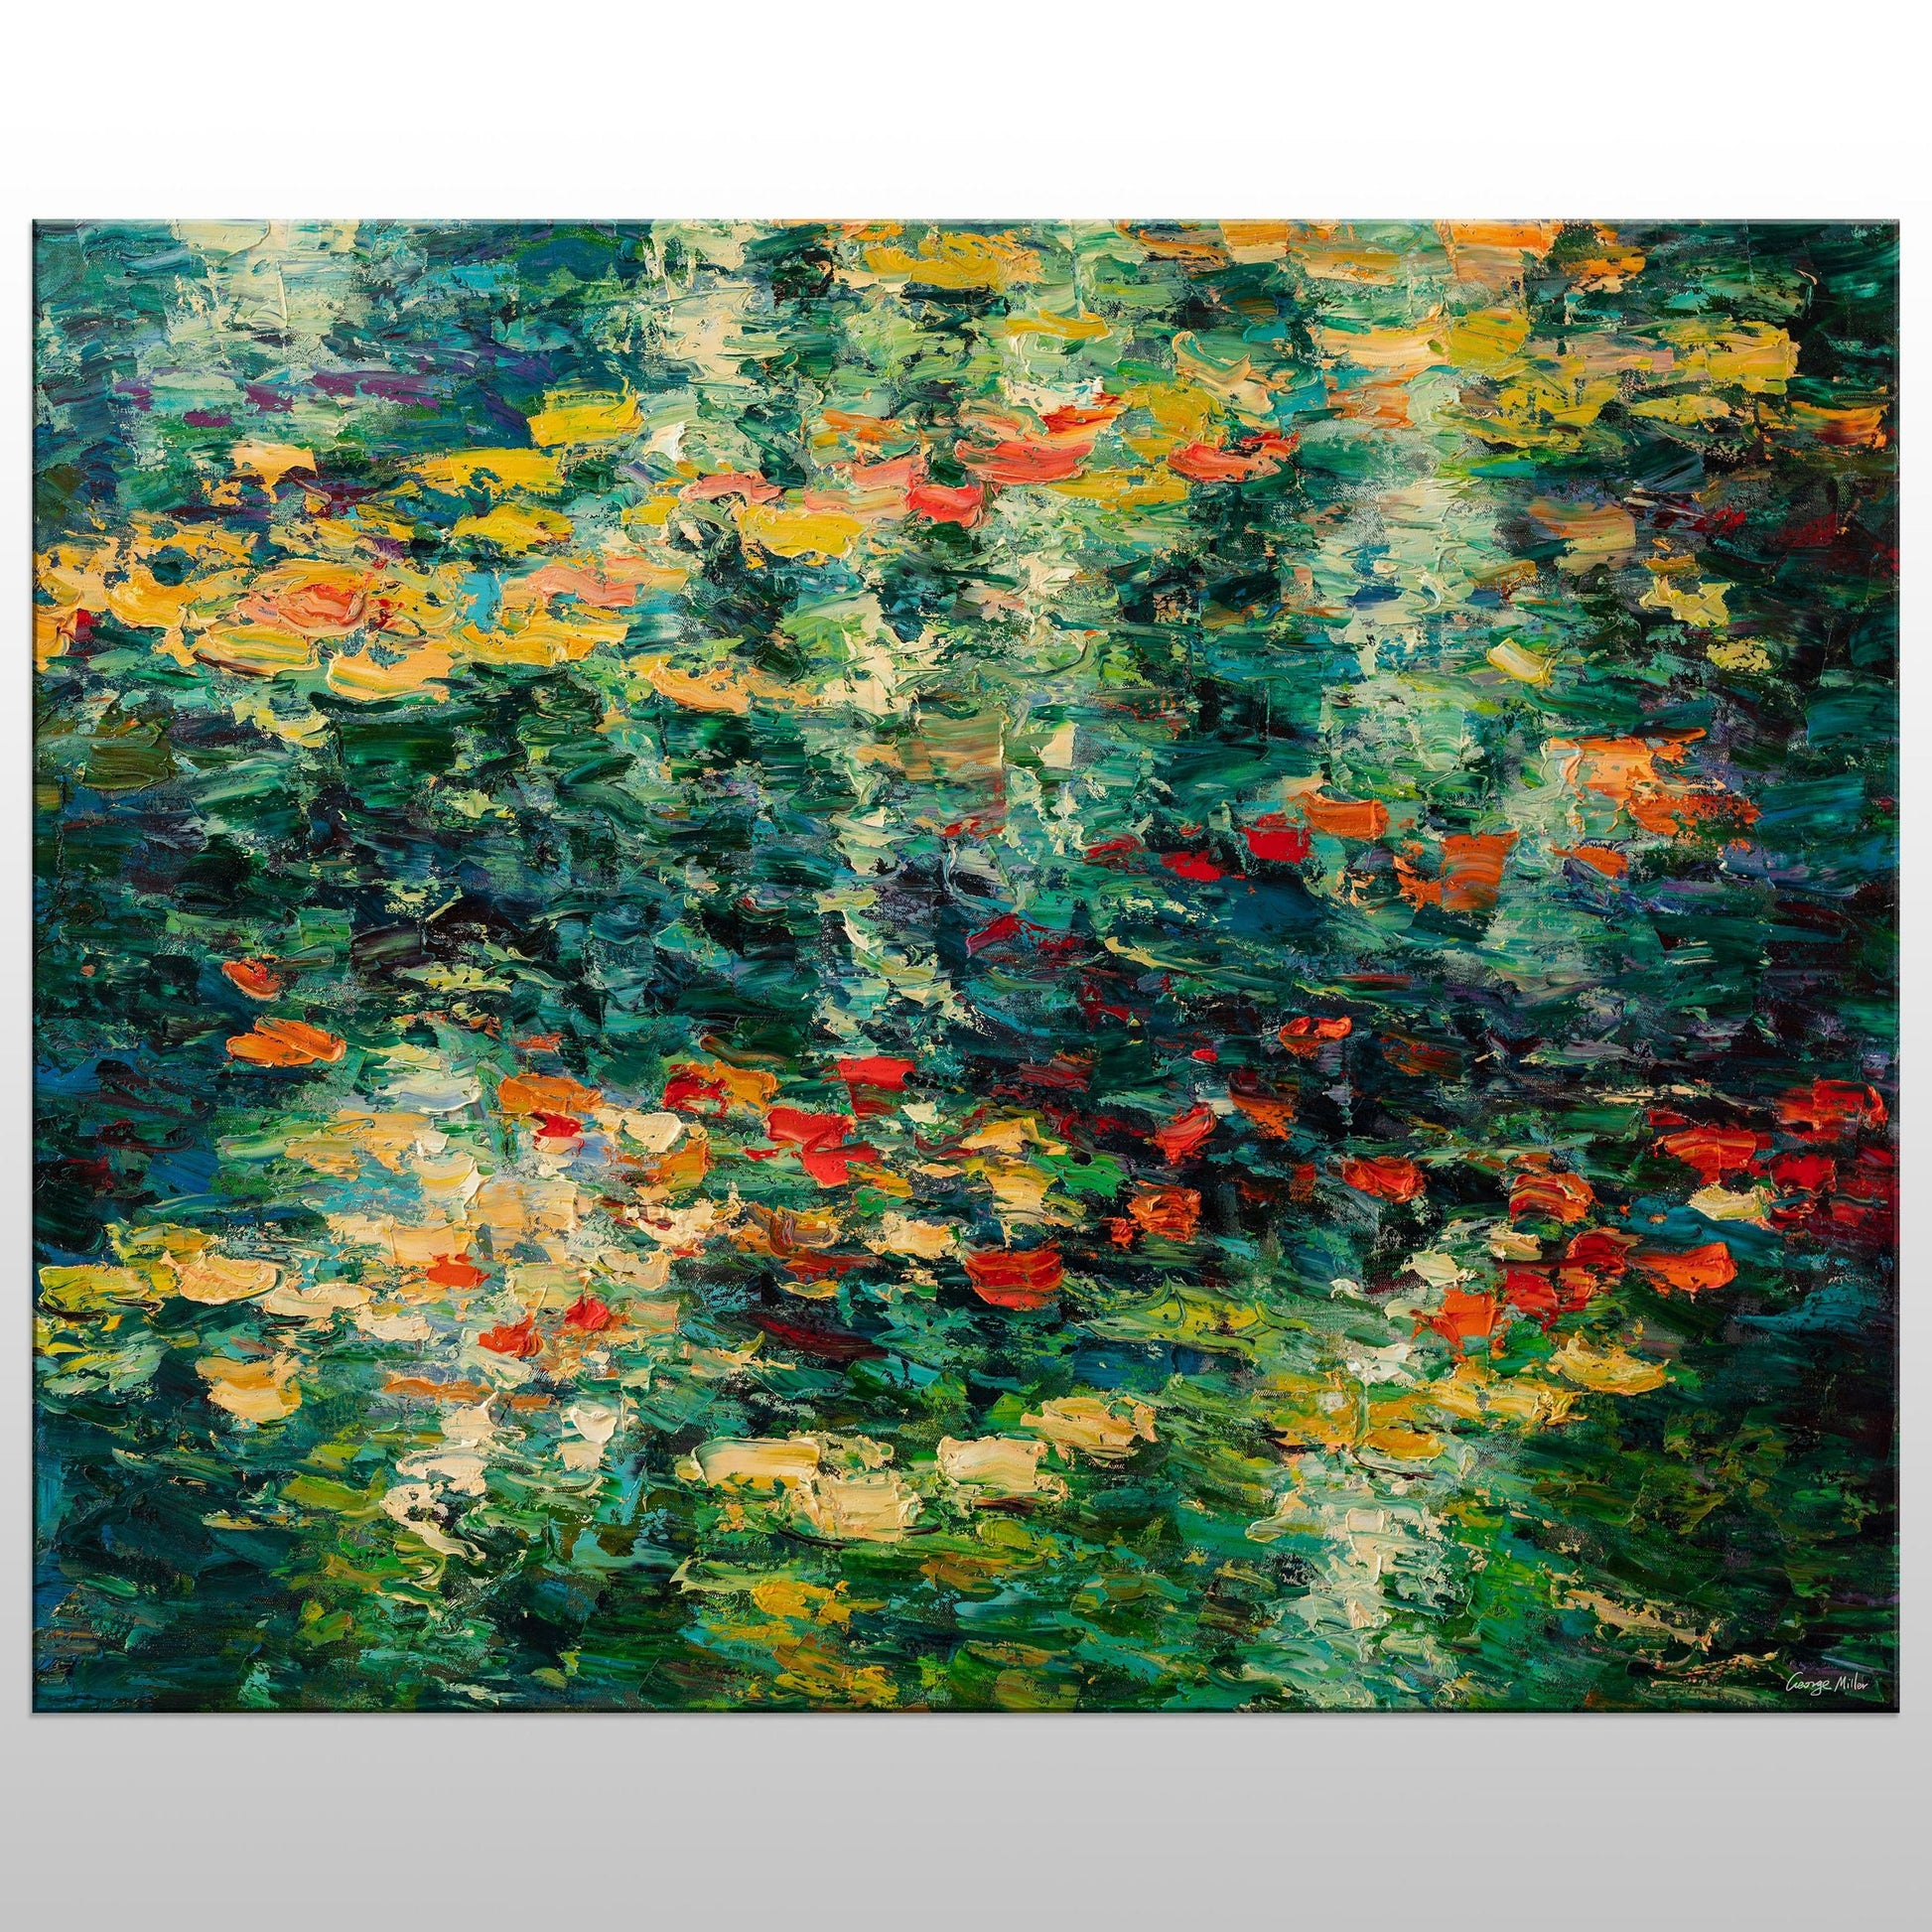 Experience the serenity of nature with Original Oil Painting Pond with Waterlilies by George Miller